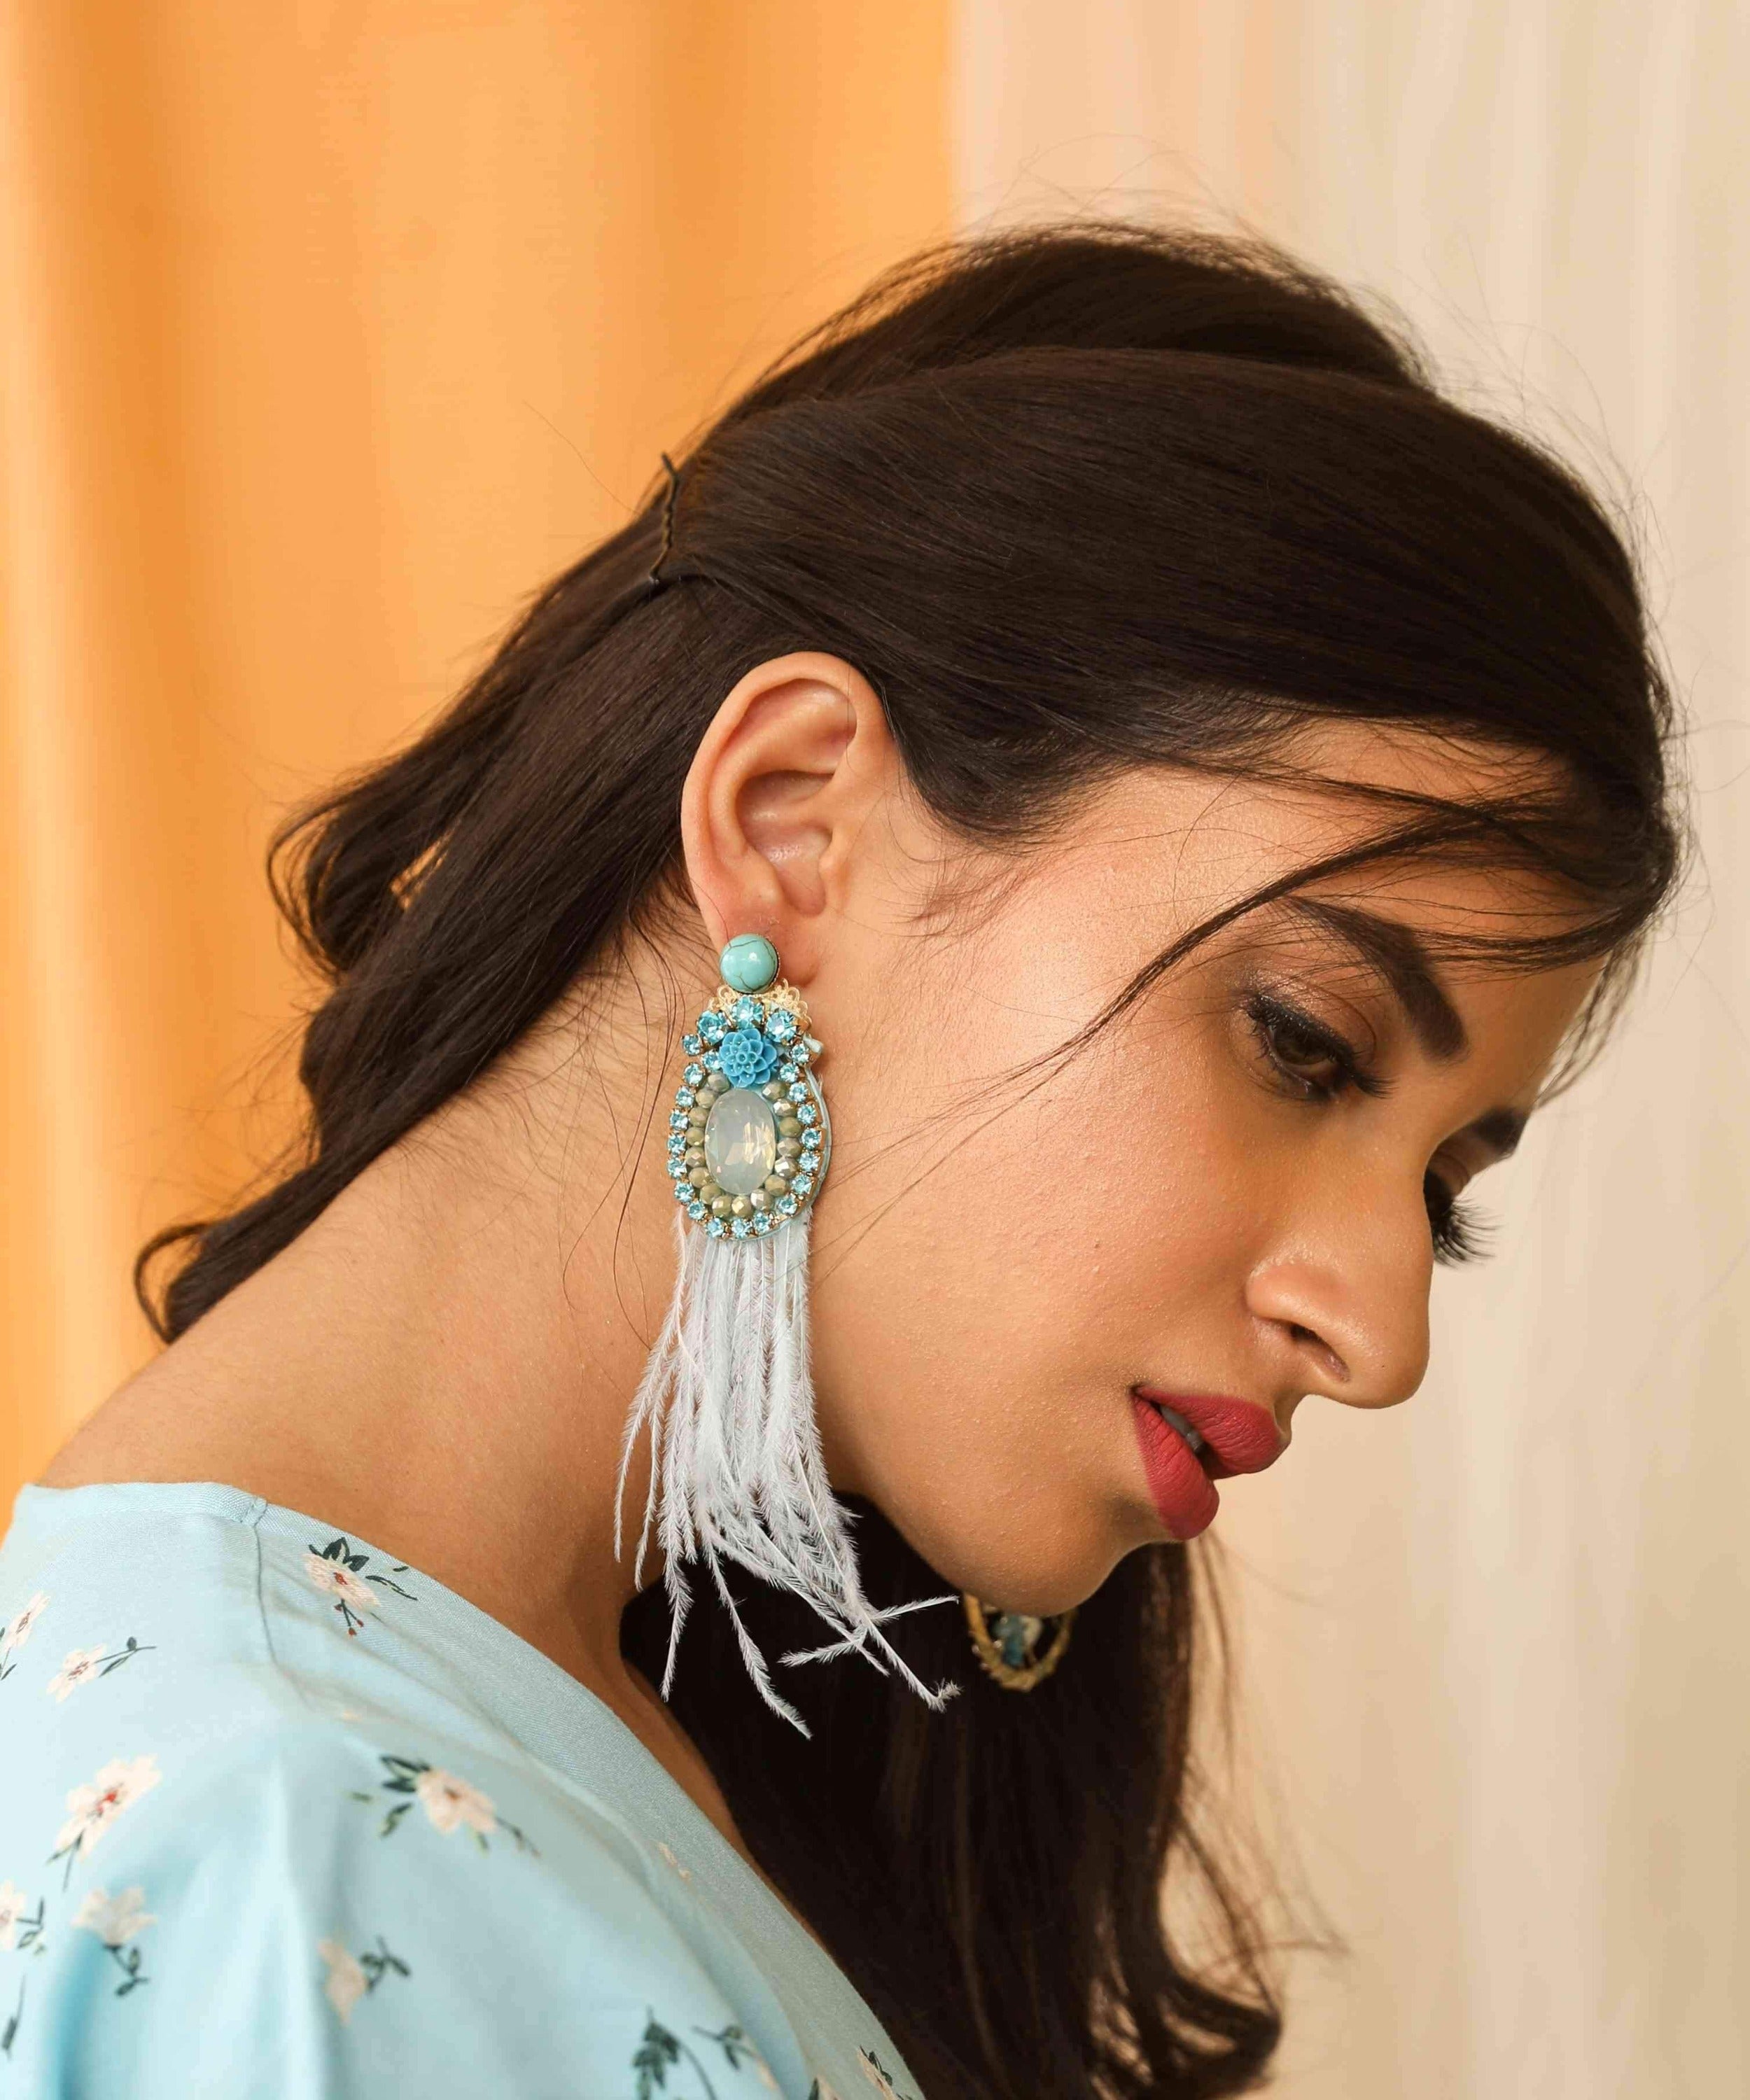 Artificial Earring set stock image. Image of rise, chandigarh - 88803655